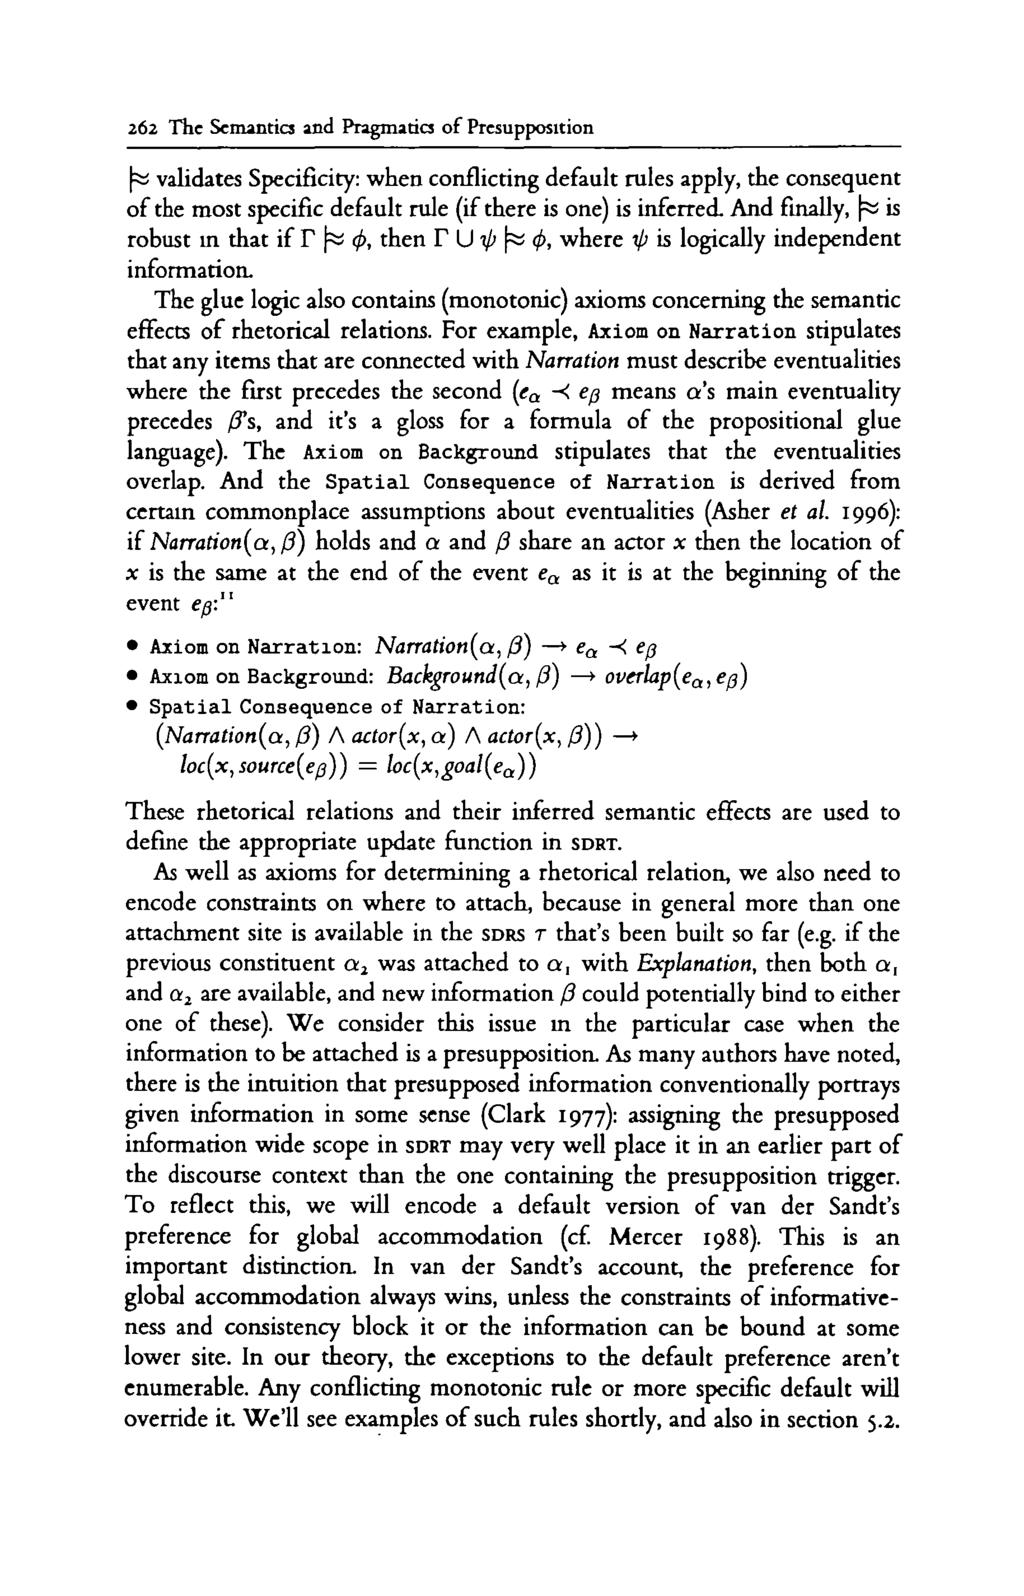 262 The Semantics and Pragmatics of Presupposition \a validates Specificity: when conflicting default rules apply, the consequent of the most specific default rule (if there is one) is inferred.